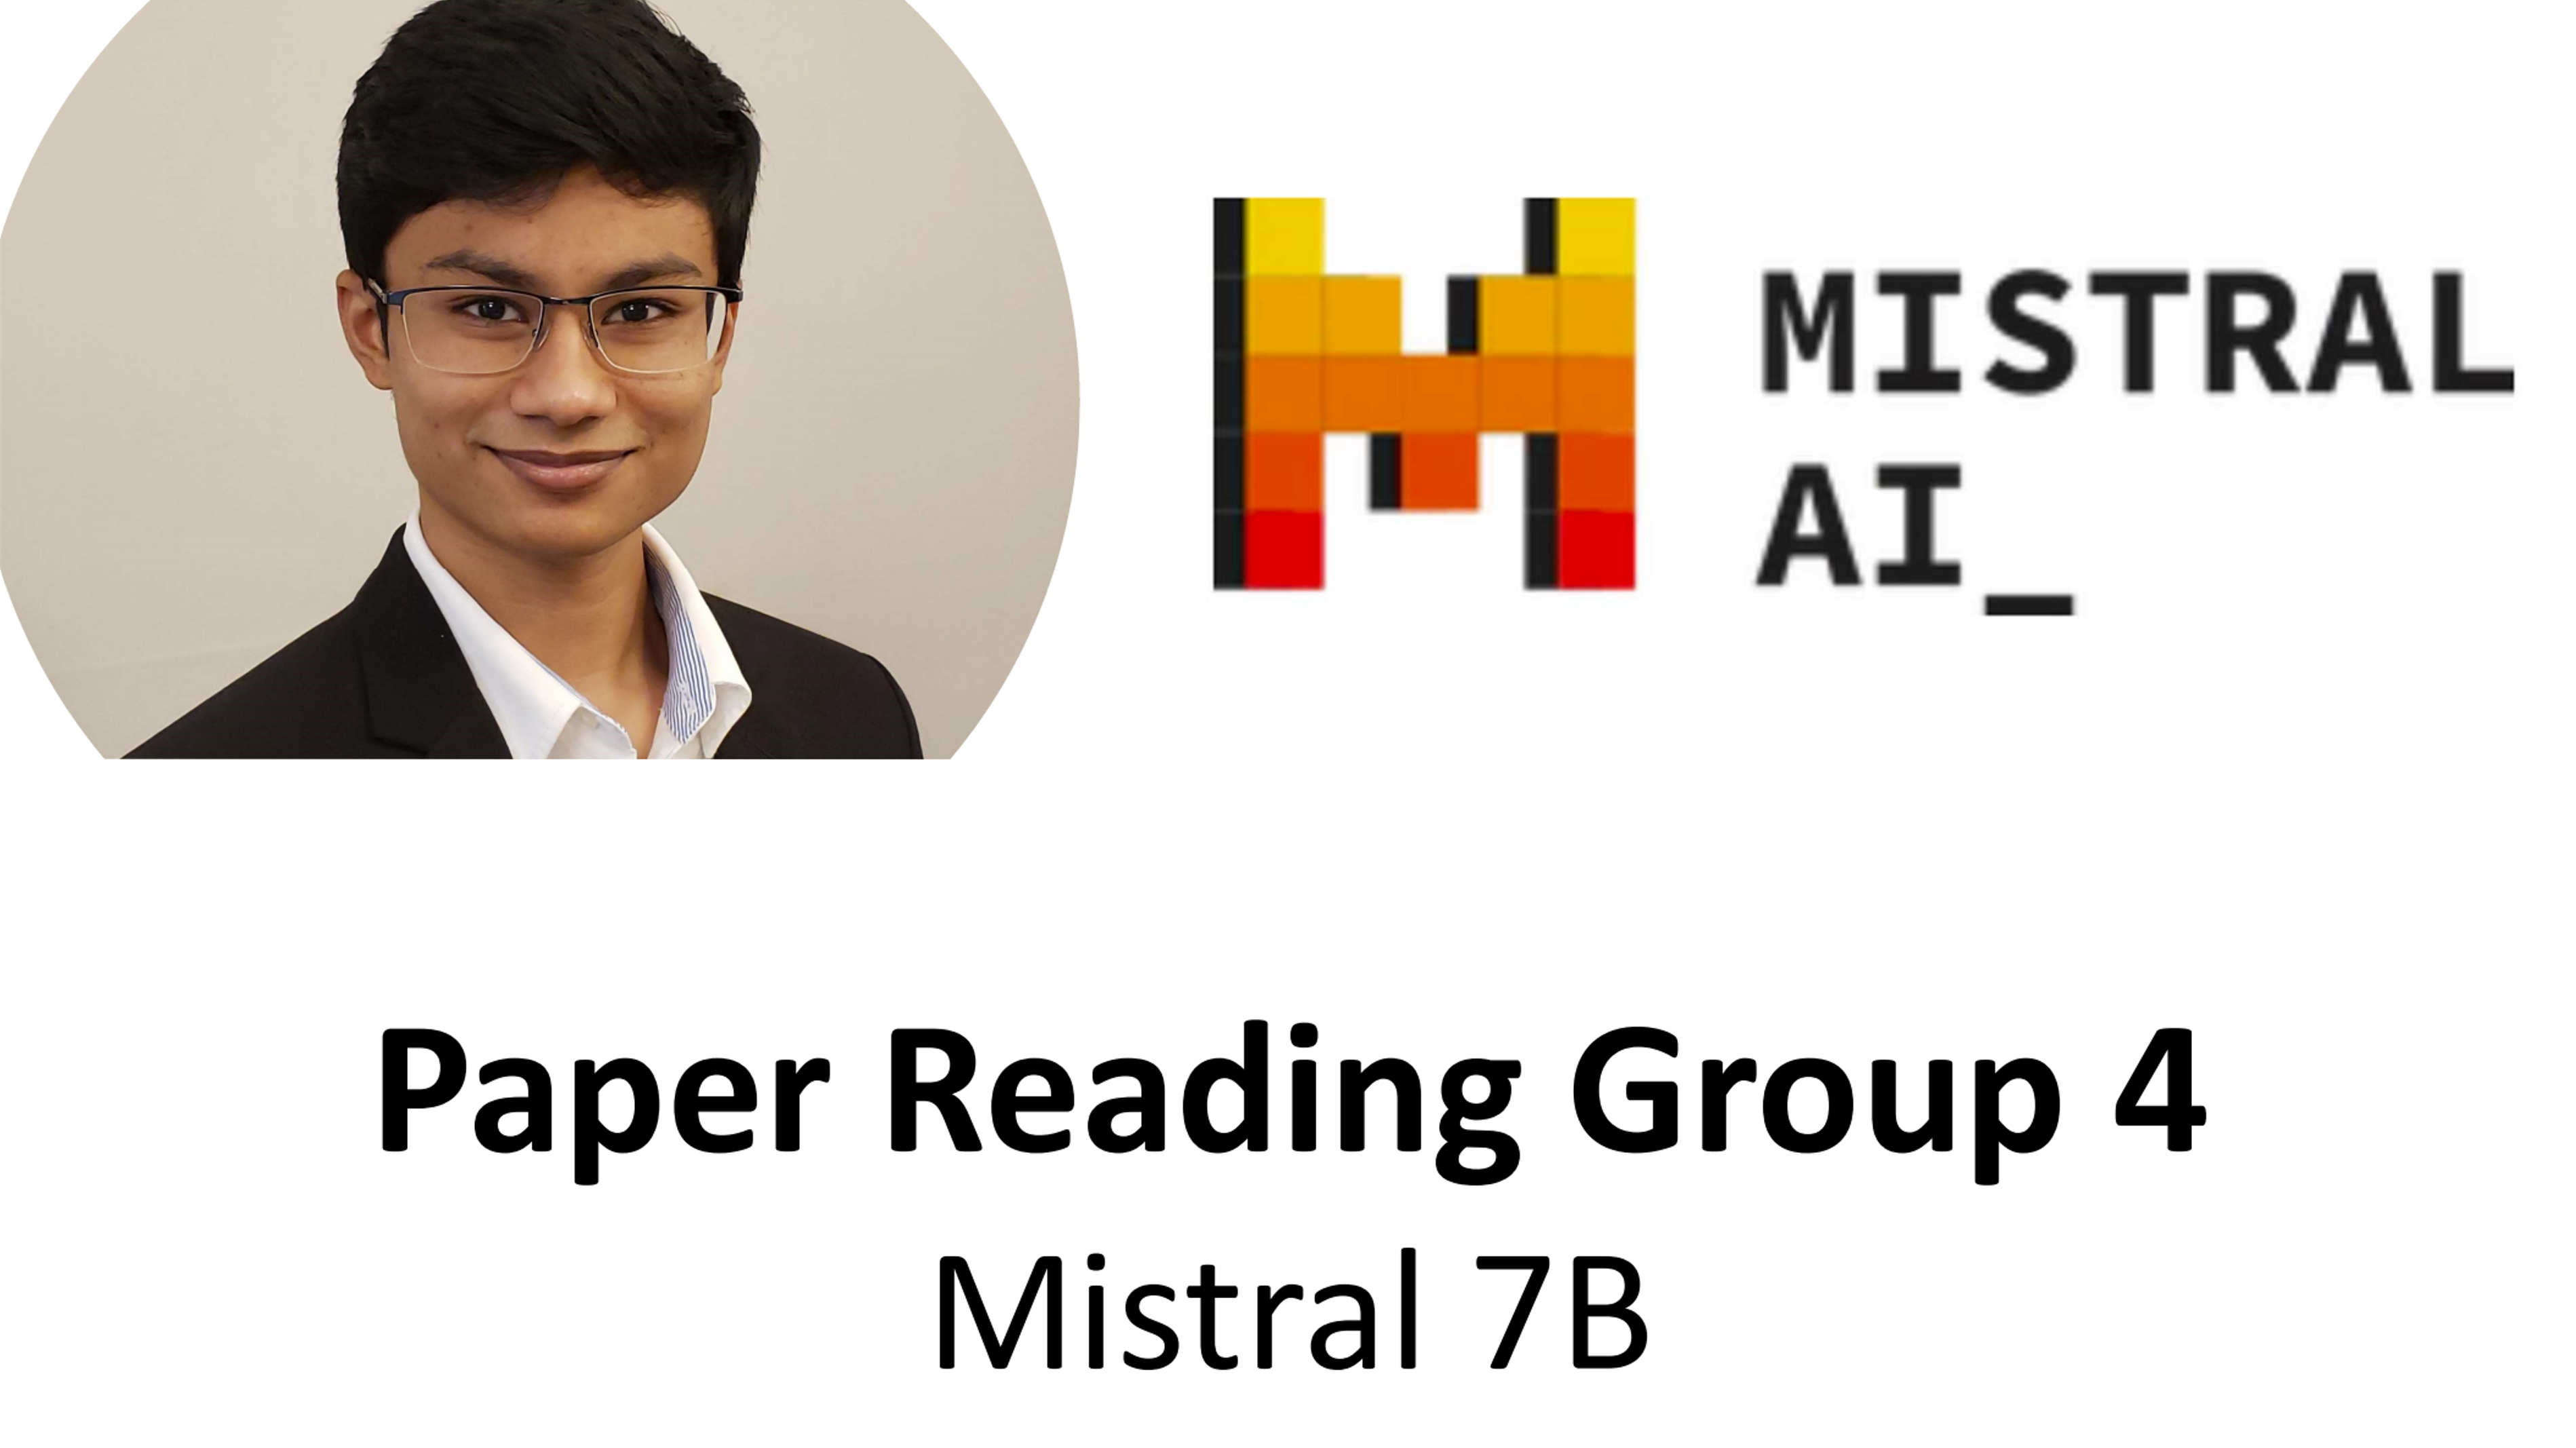 Paper Reading Group 4: Diving Into Open-Source LLM Mistral 7B event